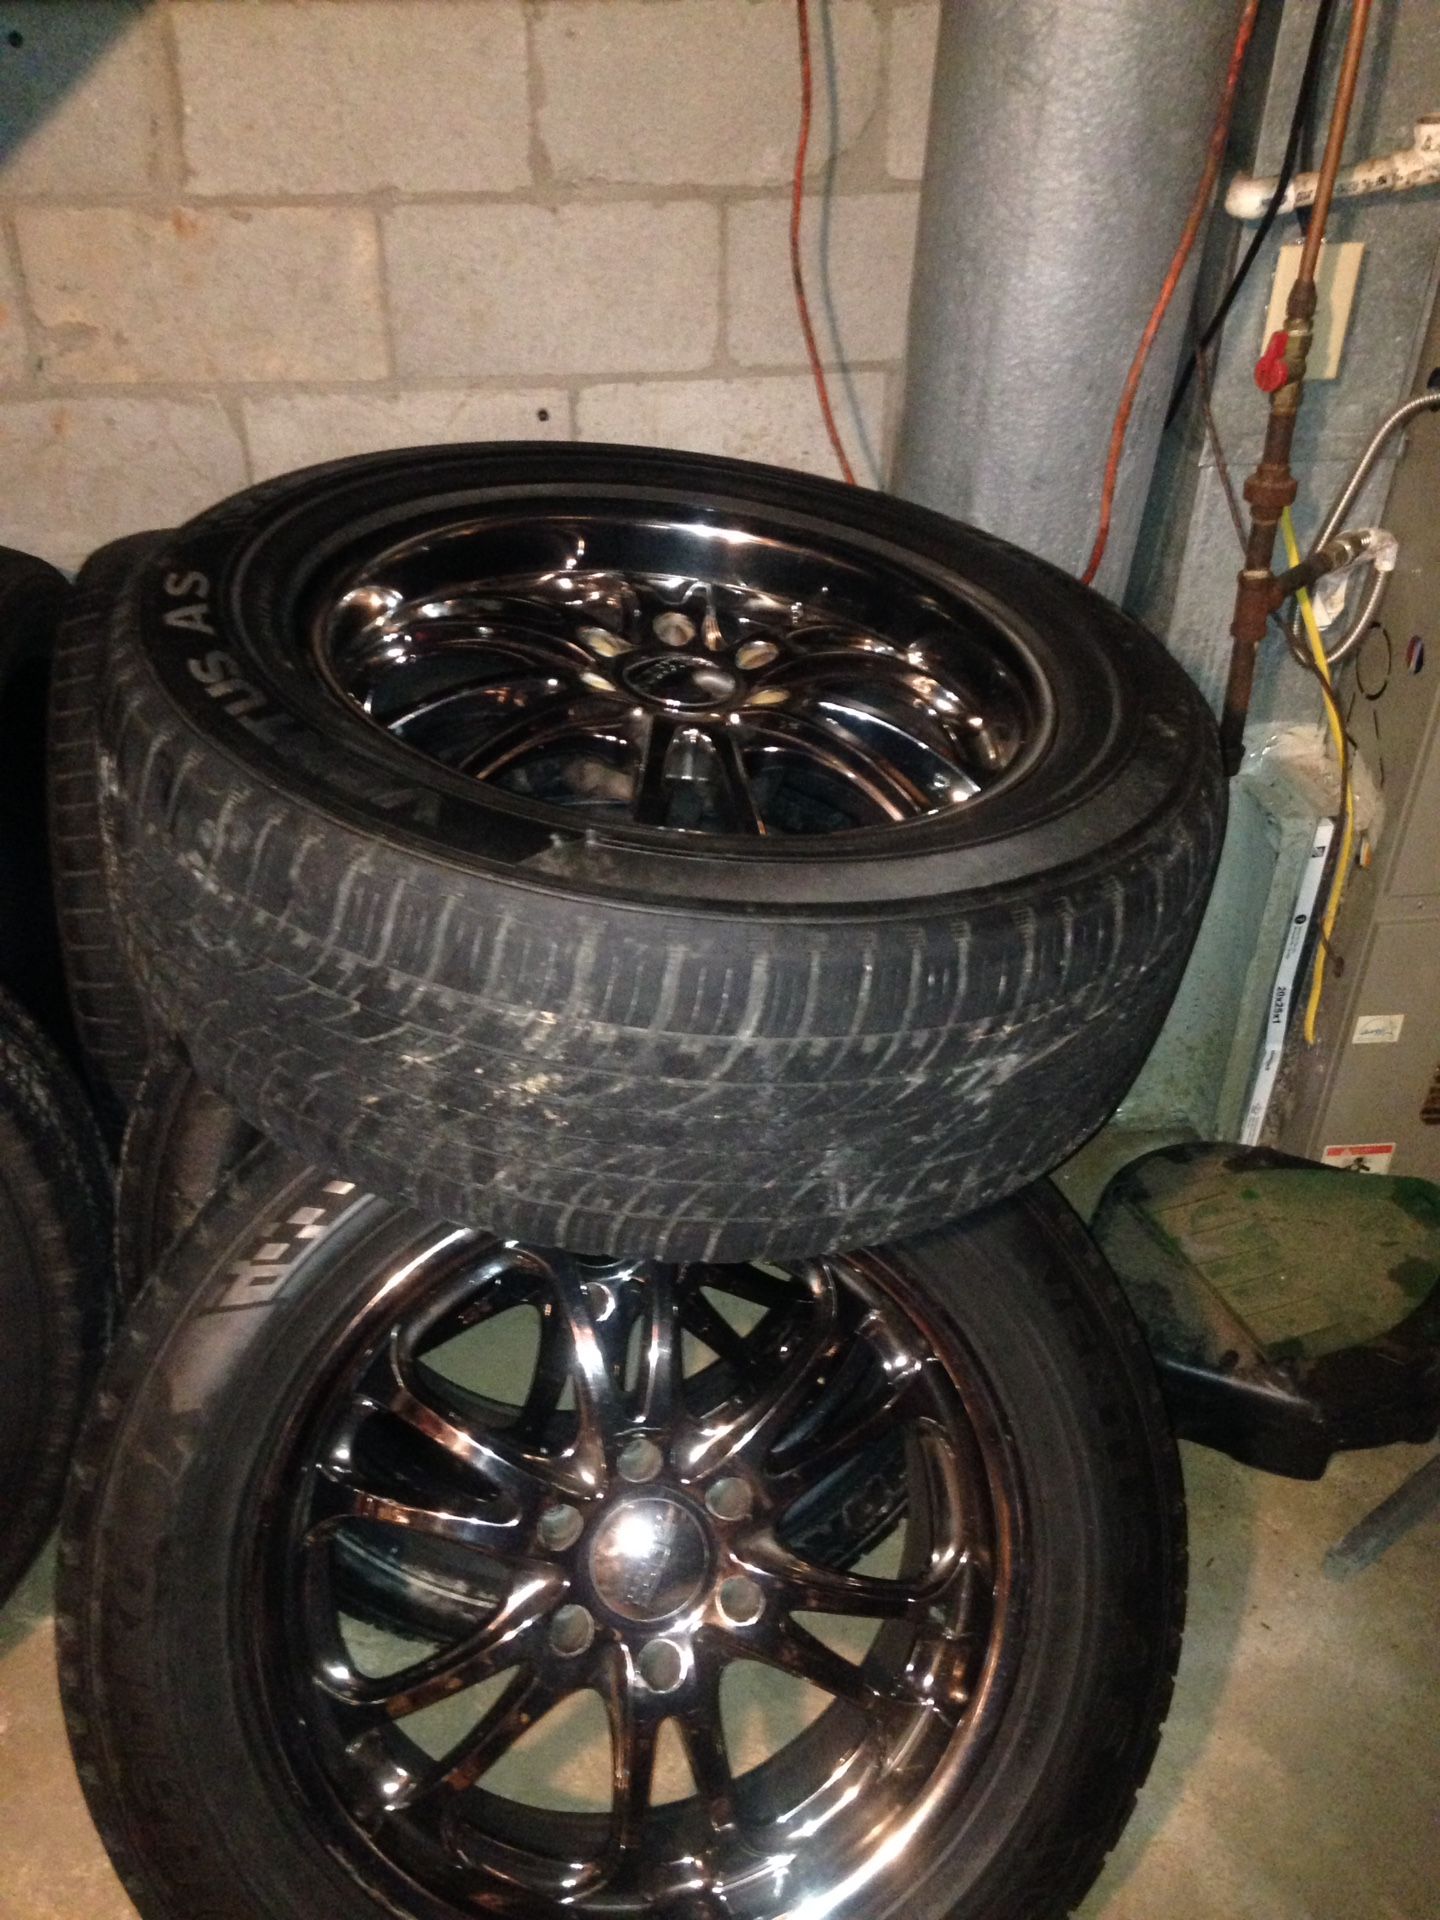 20" rims and tires rims fit 6 lug Chevy Tahoe suburban pattern.